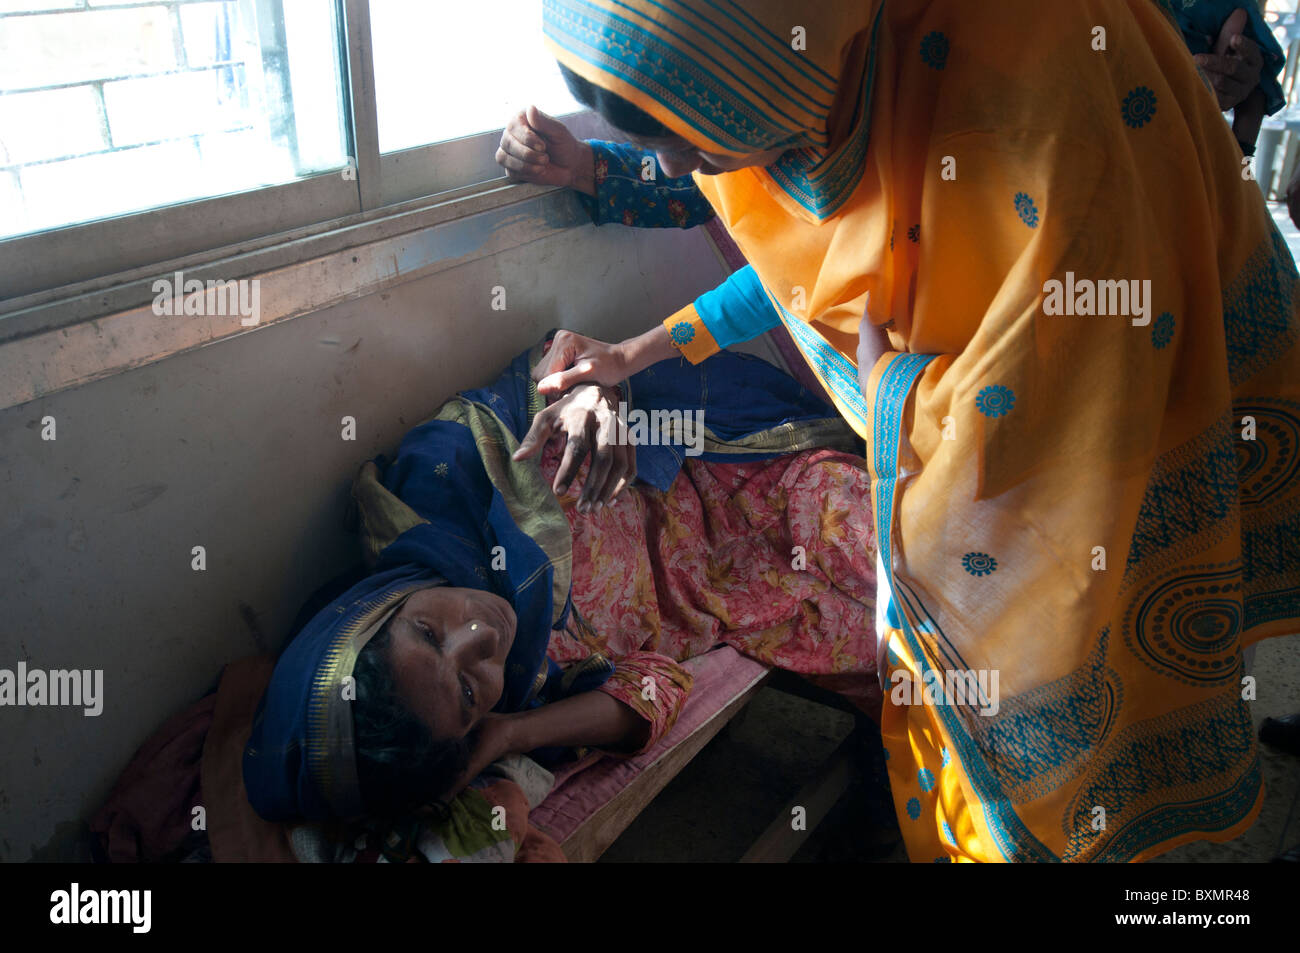 Sindh province Shaddat Kot .After the flood.   Nasiba Maqsi, mother of 5 children, has malaria and is examined by a woman doctor Stock Photo